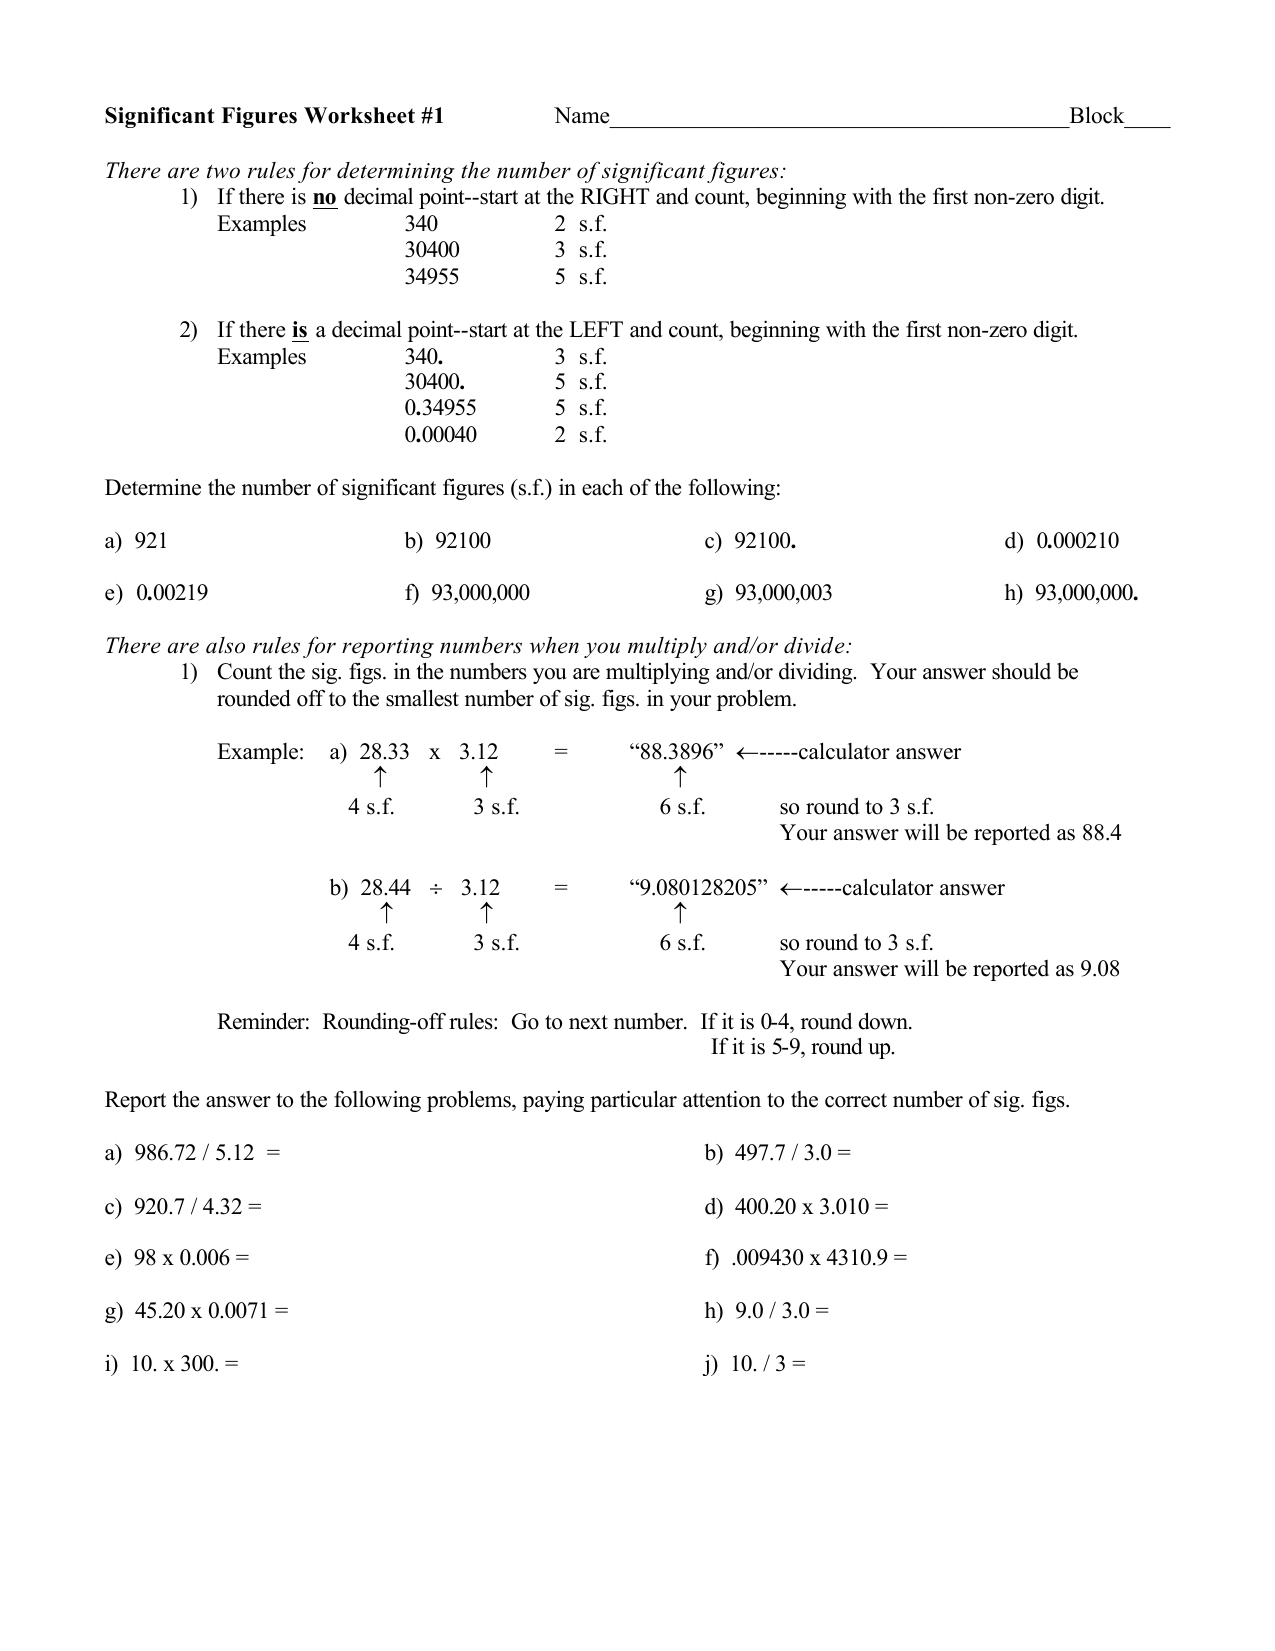 8-best-images-of-significant-figures-worksheet-with-answer-key-significant-figures-worksheet